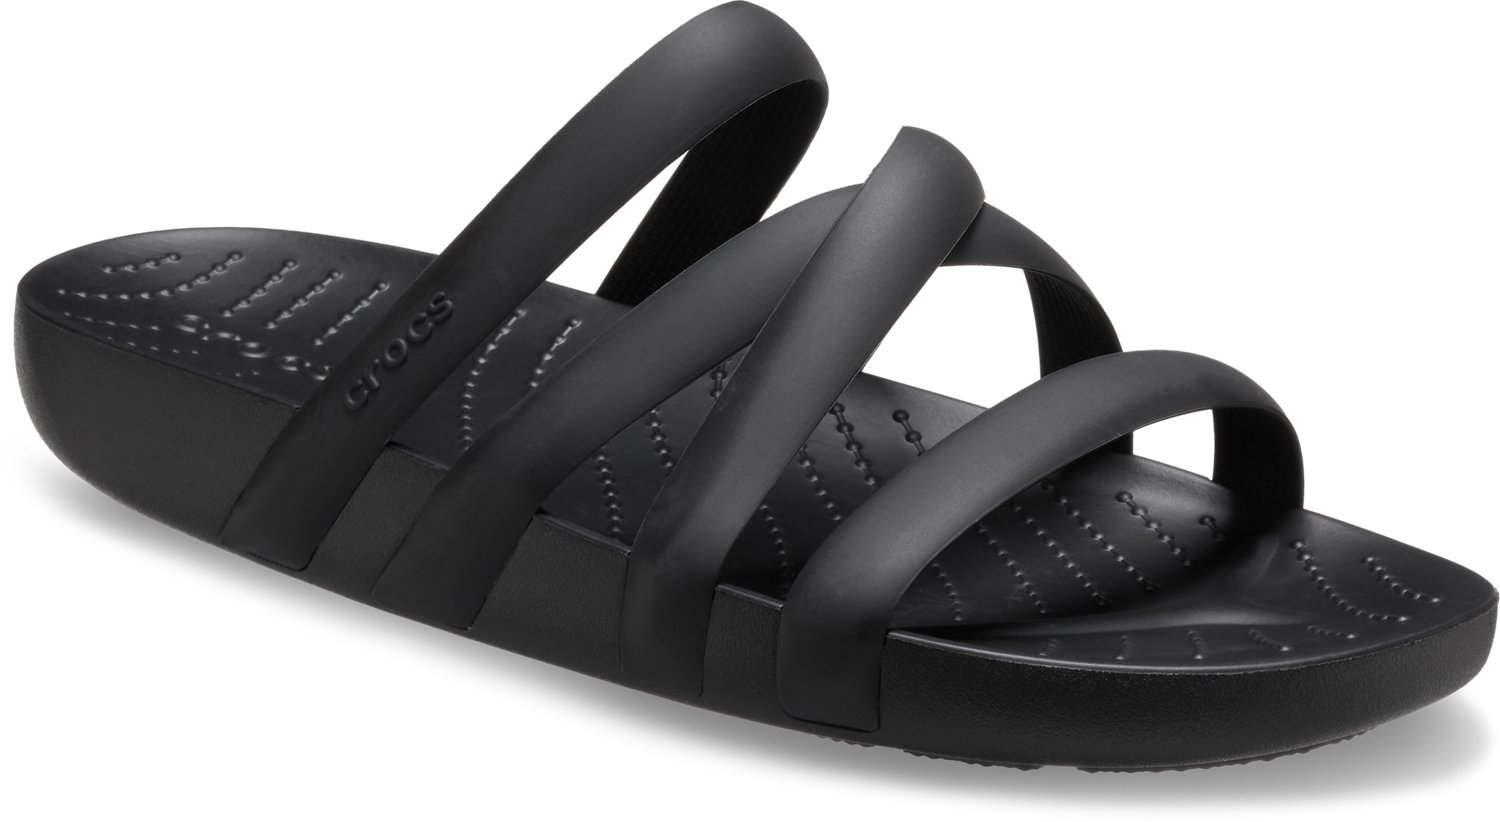 Crocs Women's Splash Strappy Sandals | Free Shipping at Academy